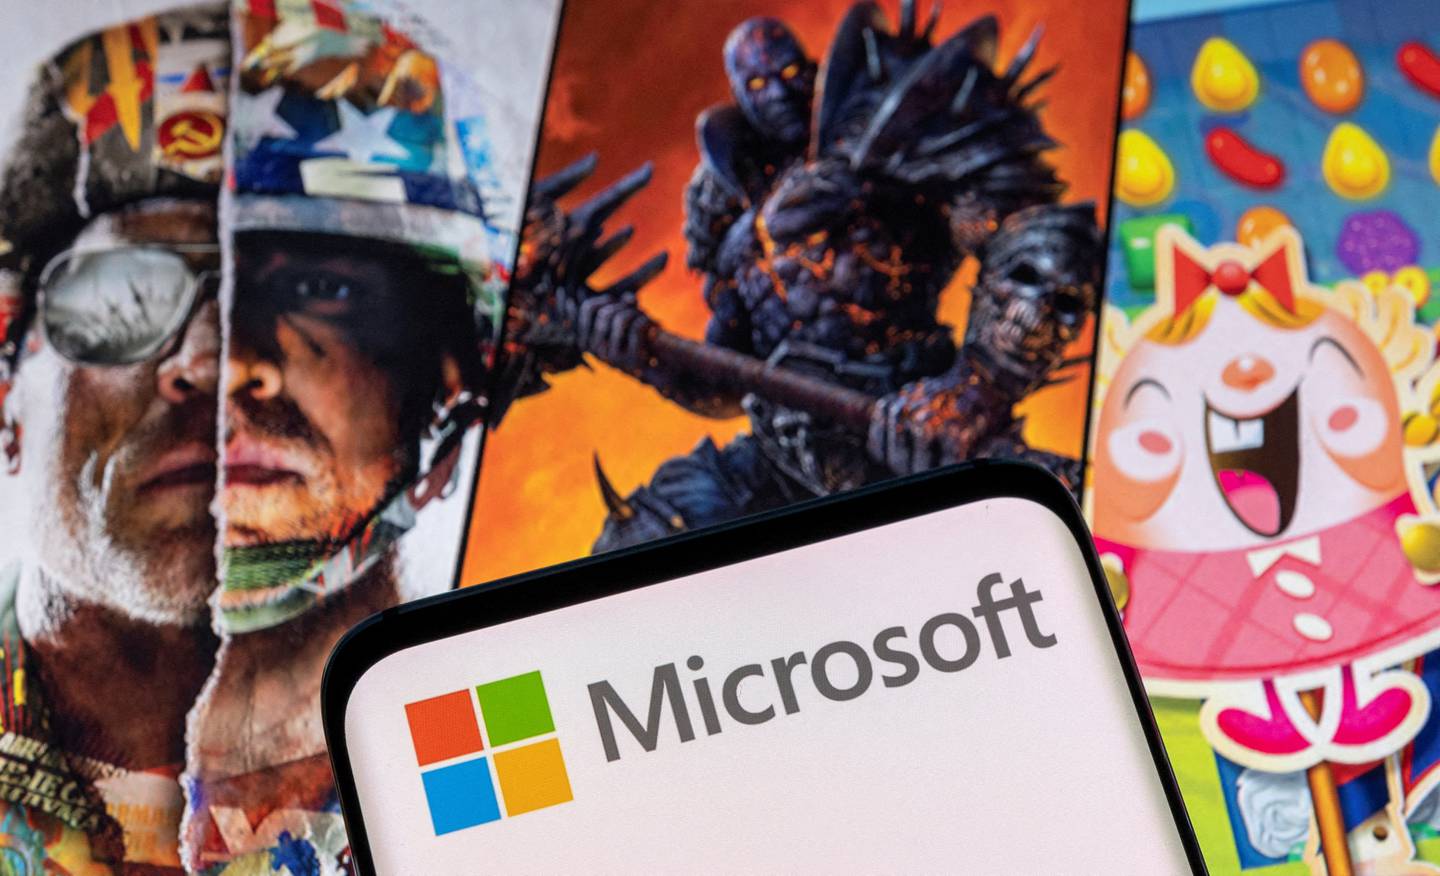 Microsoft agreed to buy video game company Activision Blizzard in a $68.7 billion all-cash deal. Reuters